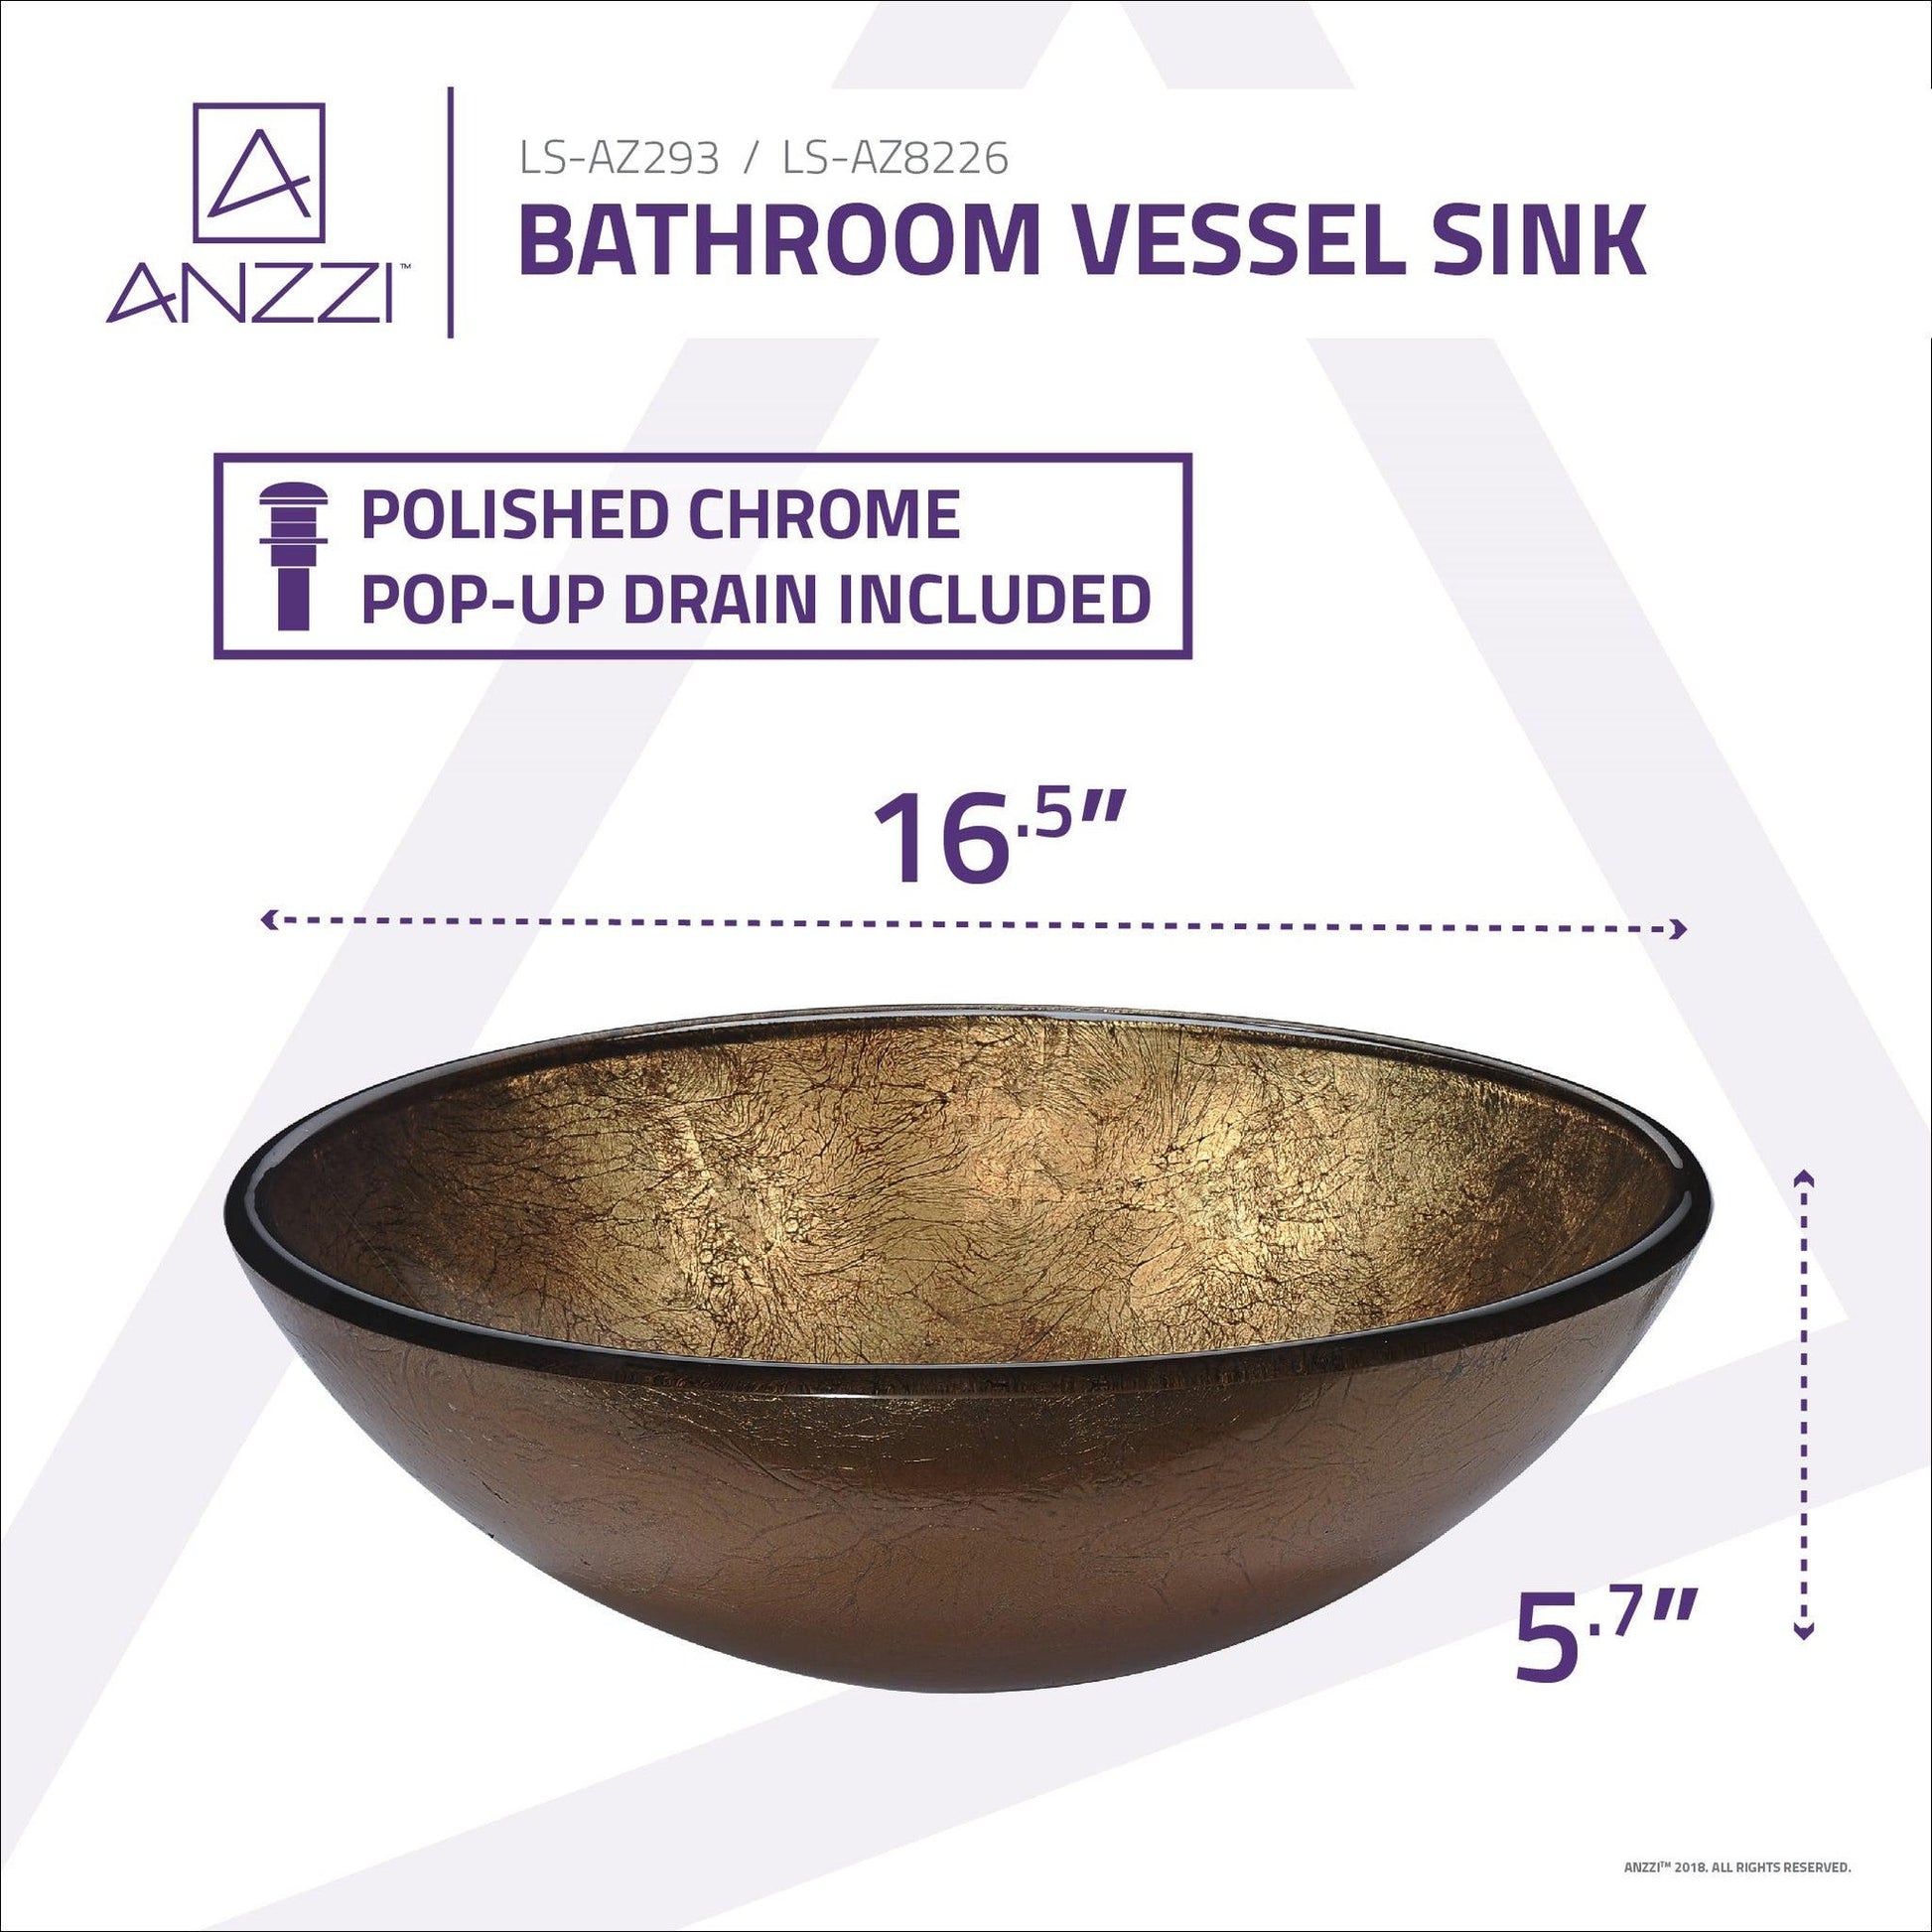 ANZZI Posh Series 17" x 17" Round Celestial Earth Deco-Glass Vessel Sink With Polished Chrome Pop-Up Drain